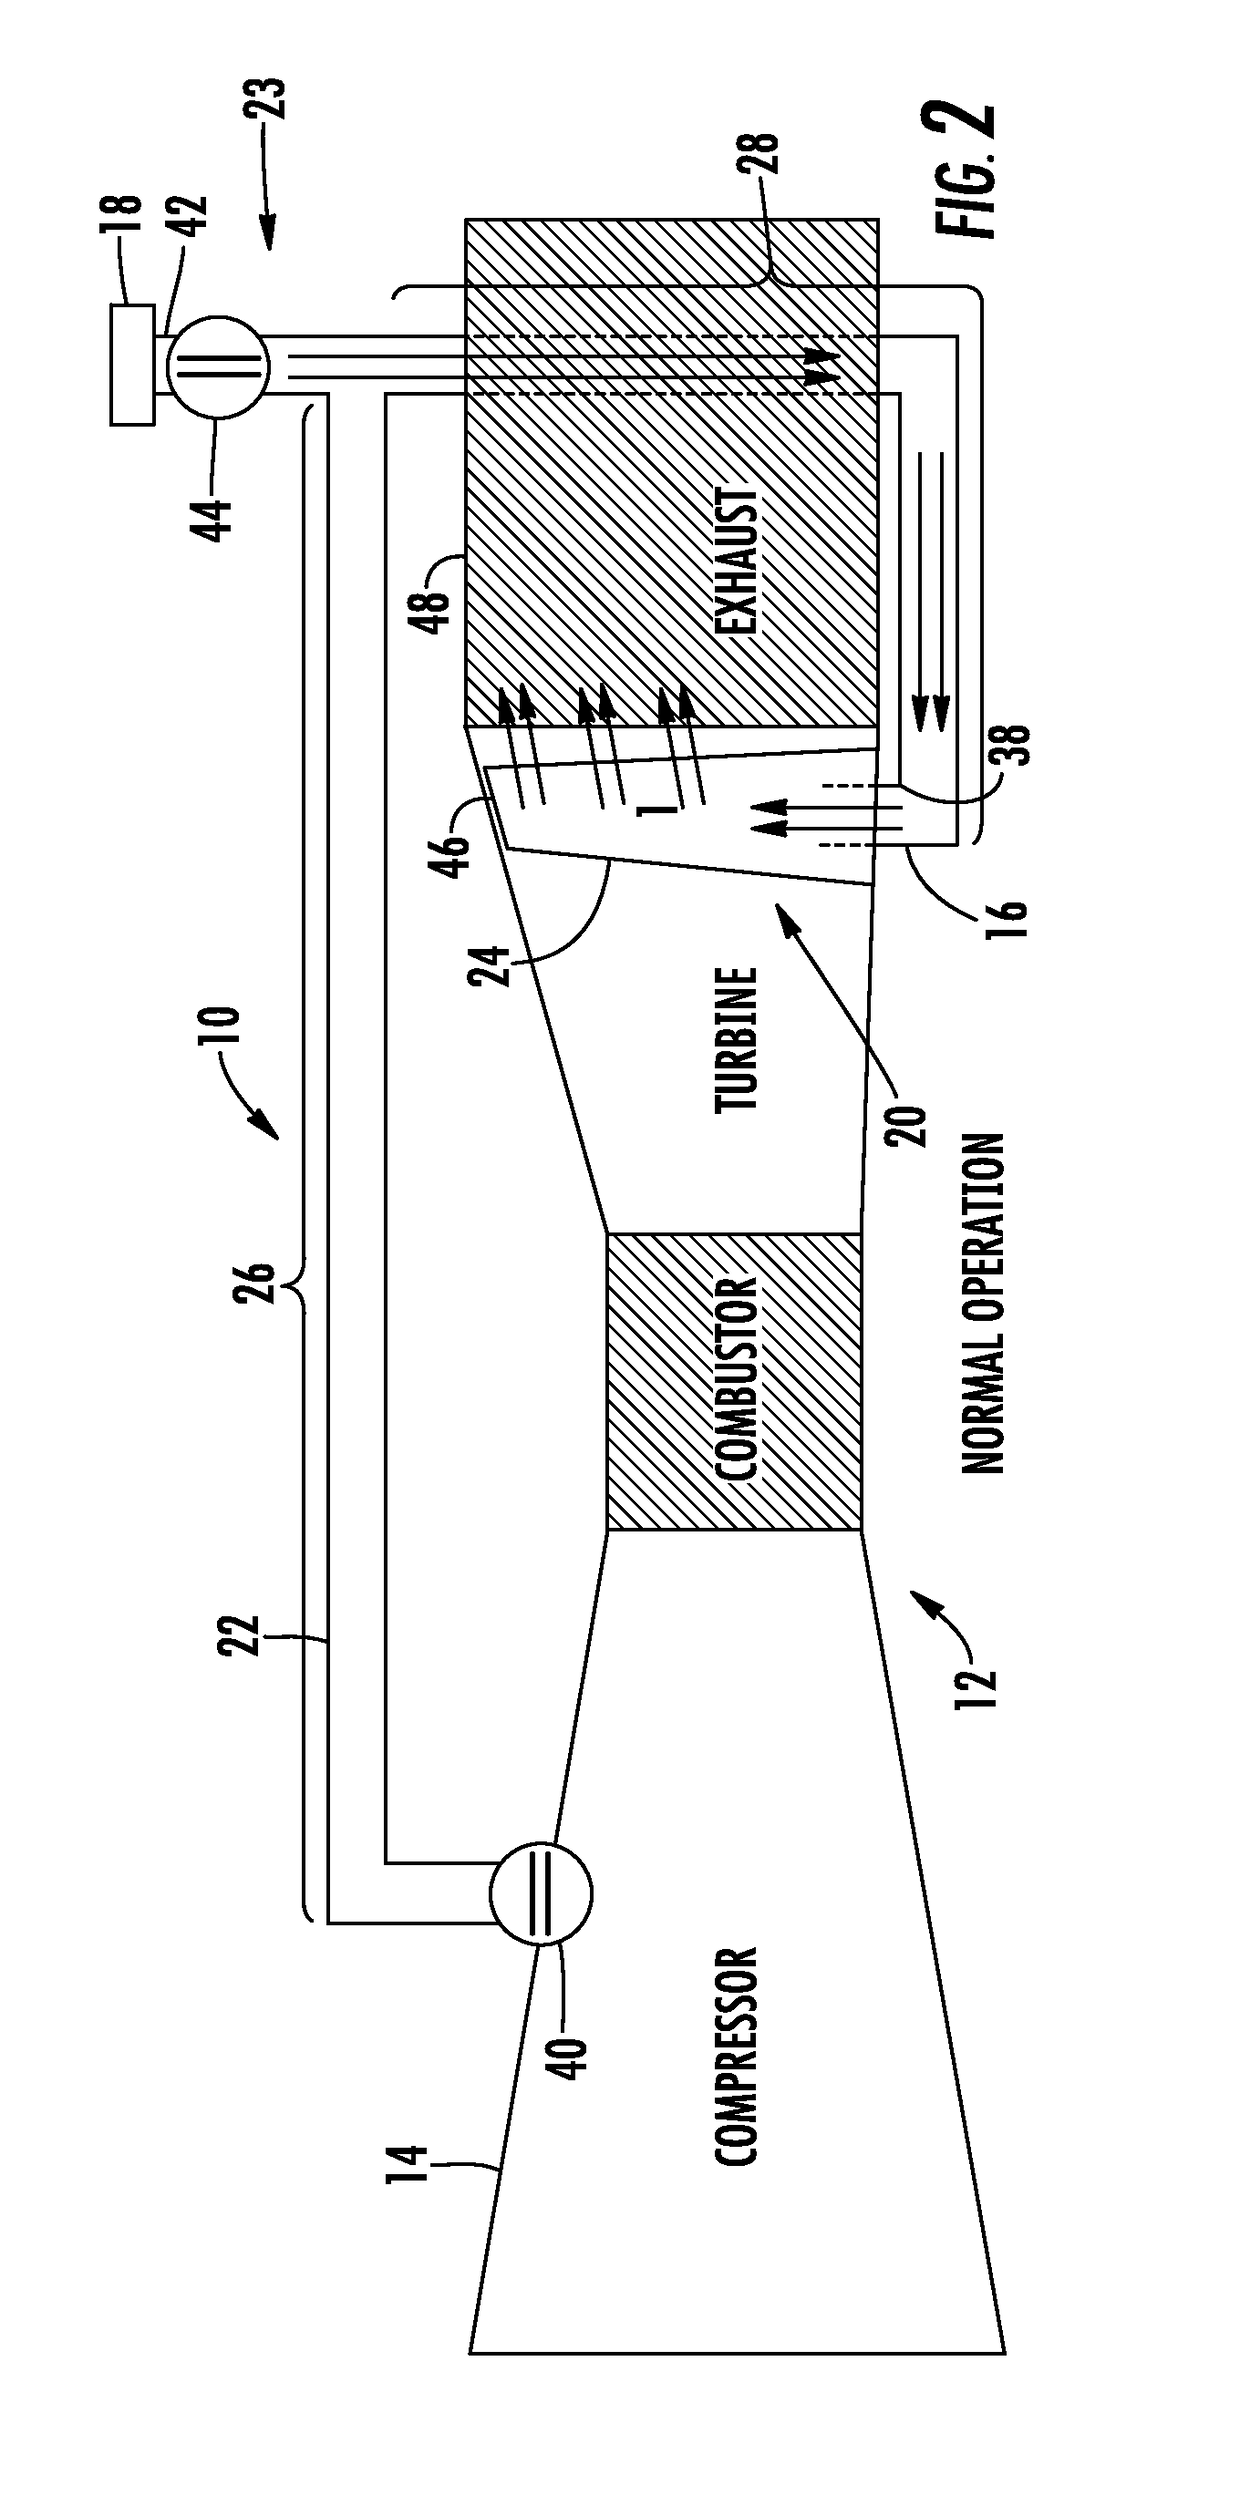 Cooling system with compressor bleed and ambient air for gas turbine engine